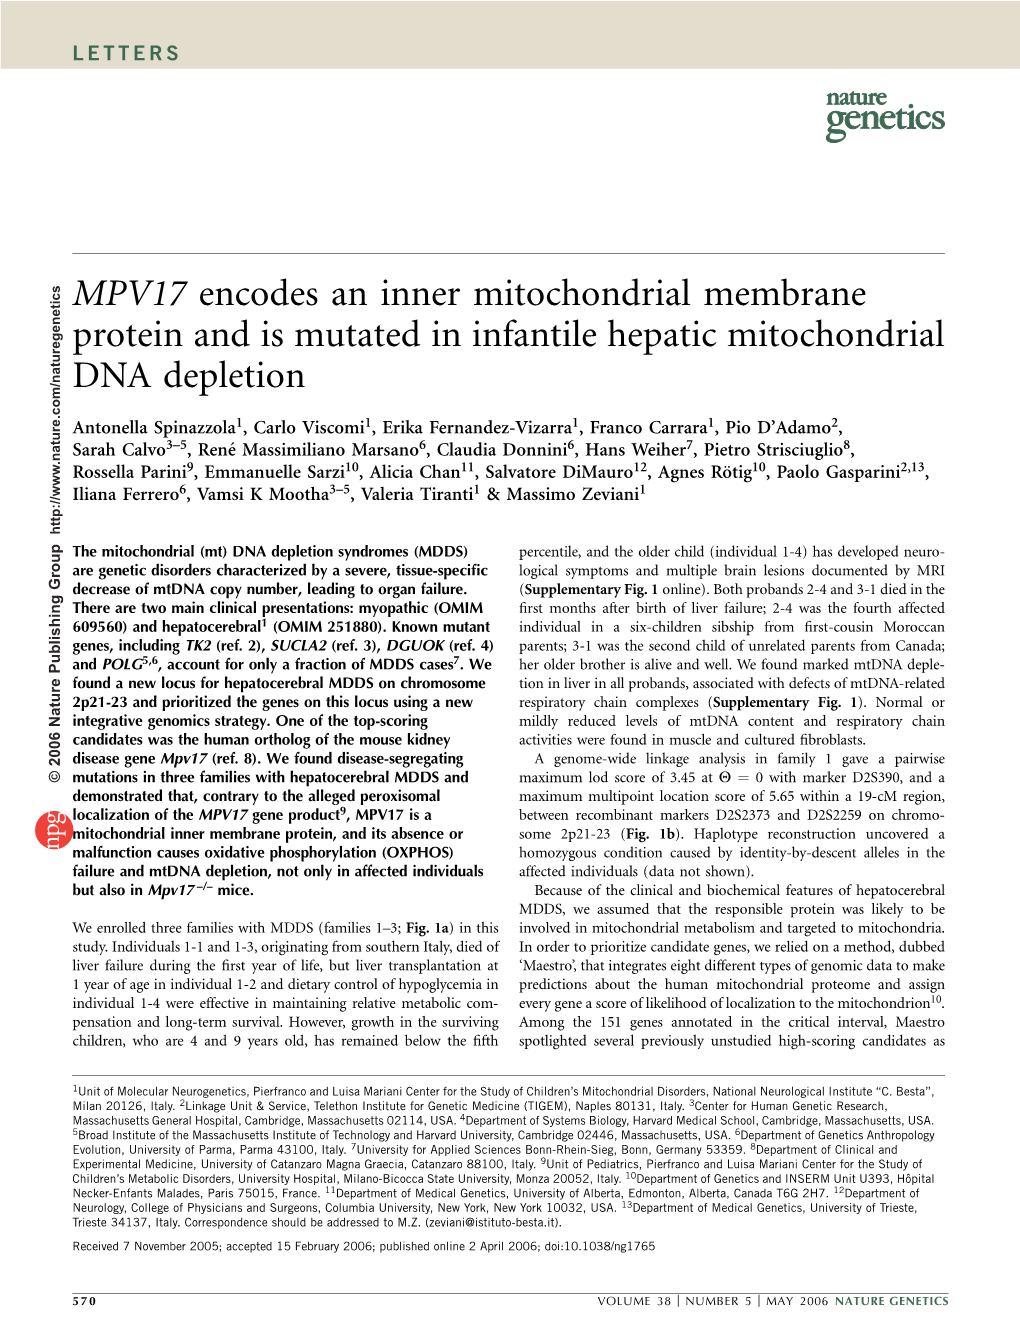 MPV17 Encodes an Inner Mitochondrial Membrane Protein and Is Mutated in Infantile Hepatic Mitochondrial DNA Depletion